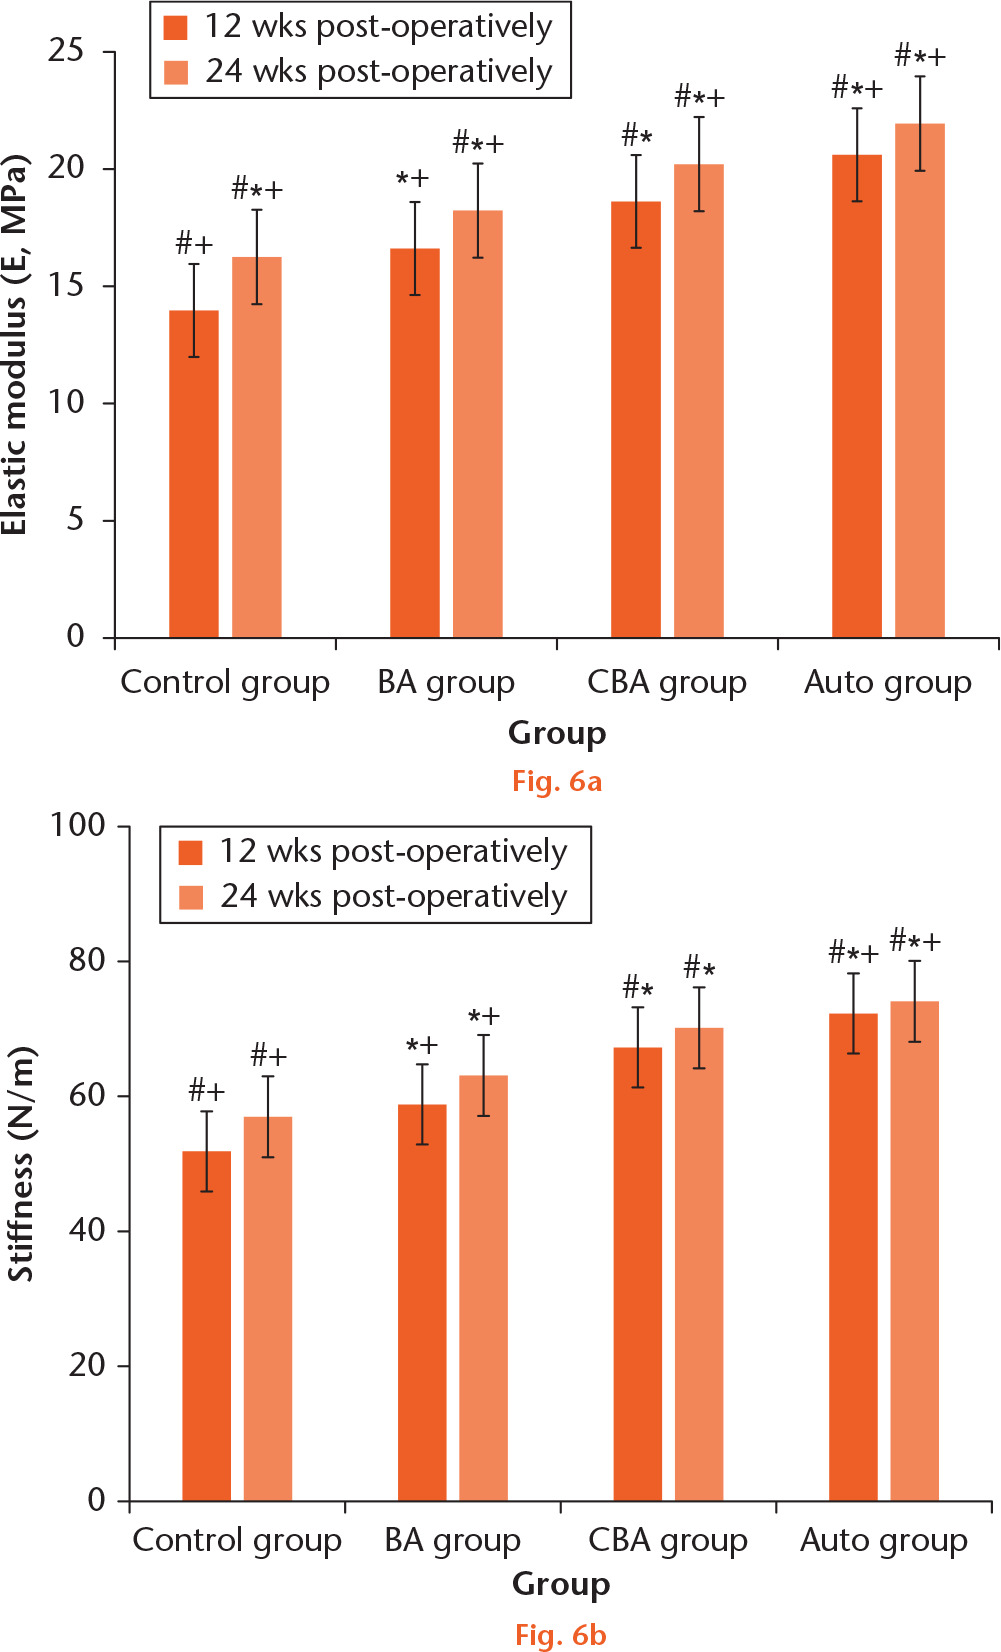  
            Biomechanical properties in the four groups at each time point. Analysis of variance (ANOVA) and least-significant differences (LSD) test. Compared with control group, *p < 0.05; compared with BA group, #p < 0.05; compared with CBA group, +p < 0.05 (Western blot analysis).
          